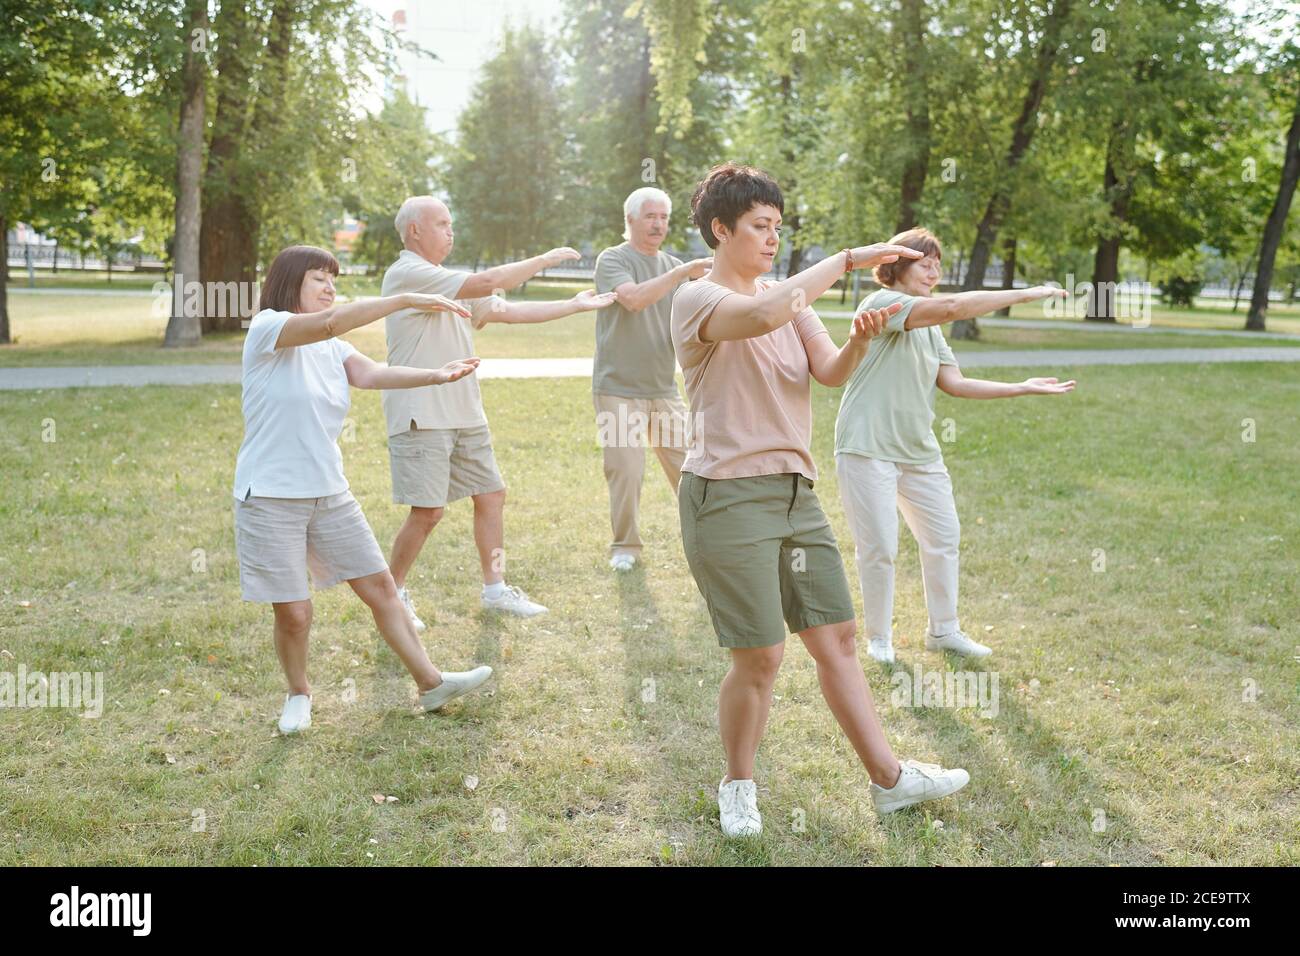 Group of focused senior people and their coach gesturing hands and doing qigong exercise in park Stock Photo